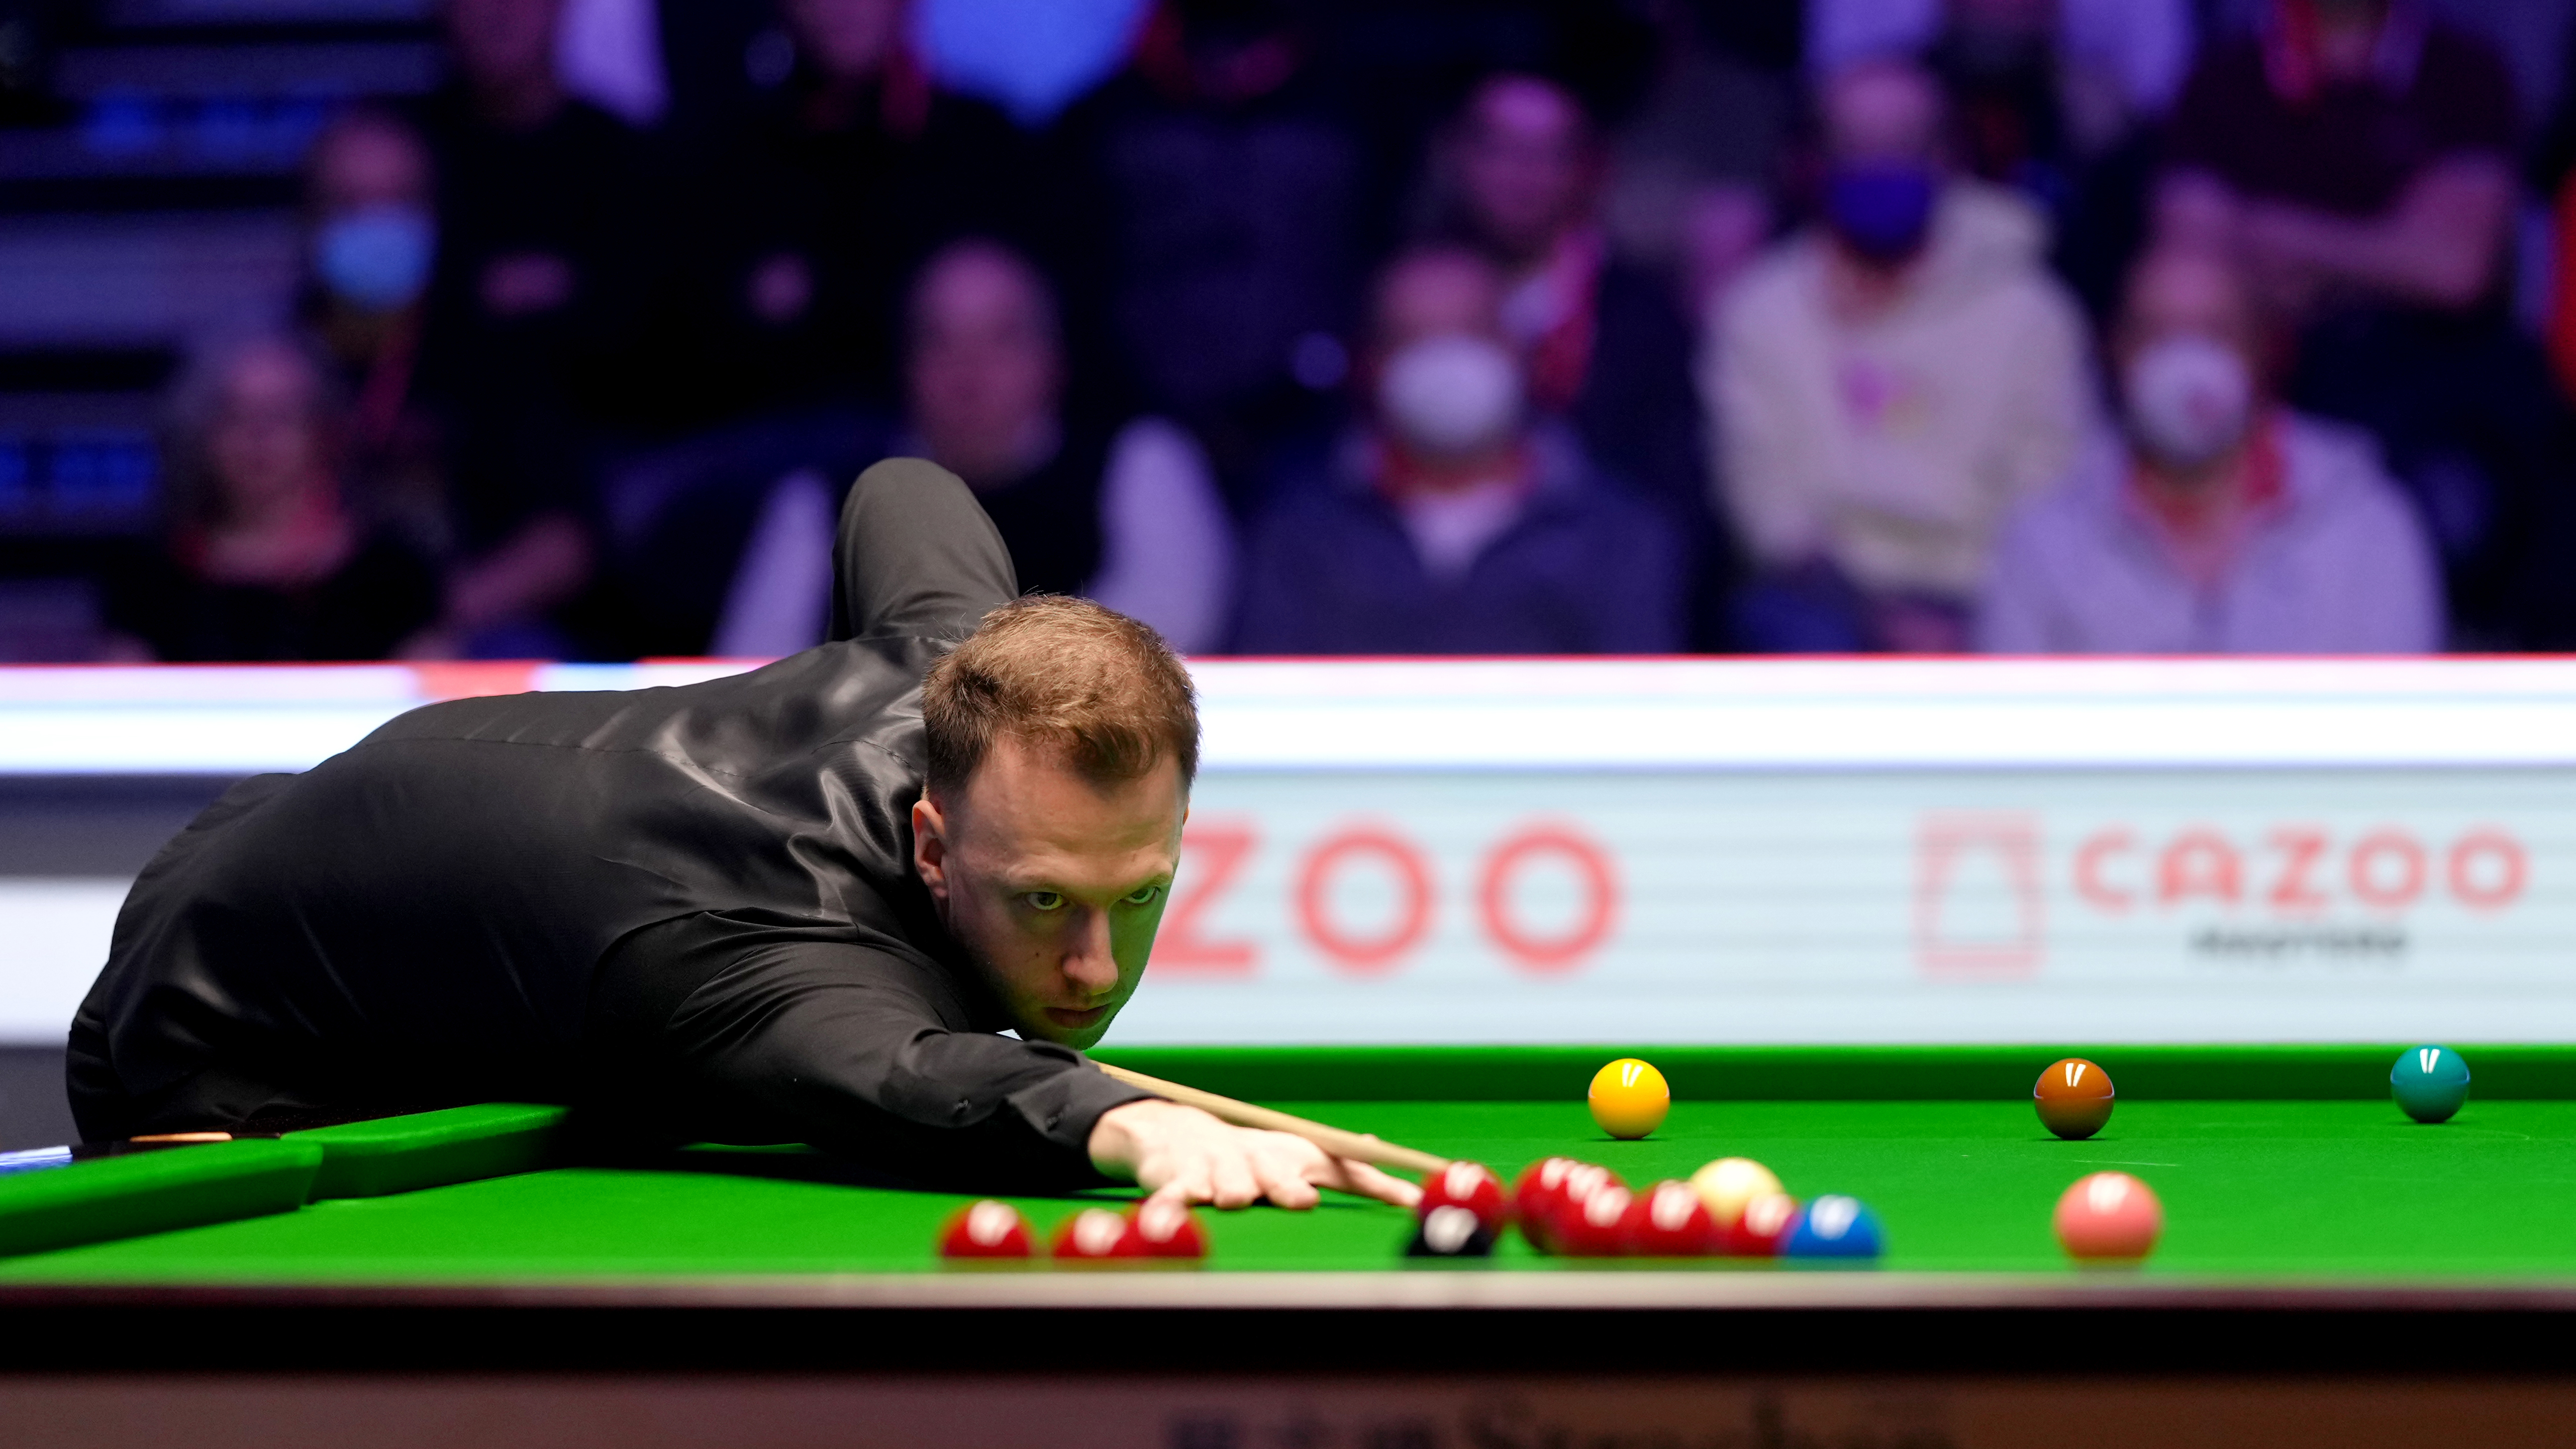 Snooker results Judd Trump beats Mark Allen in deciding frame at the Masters